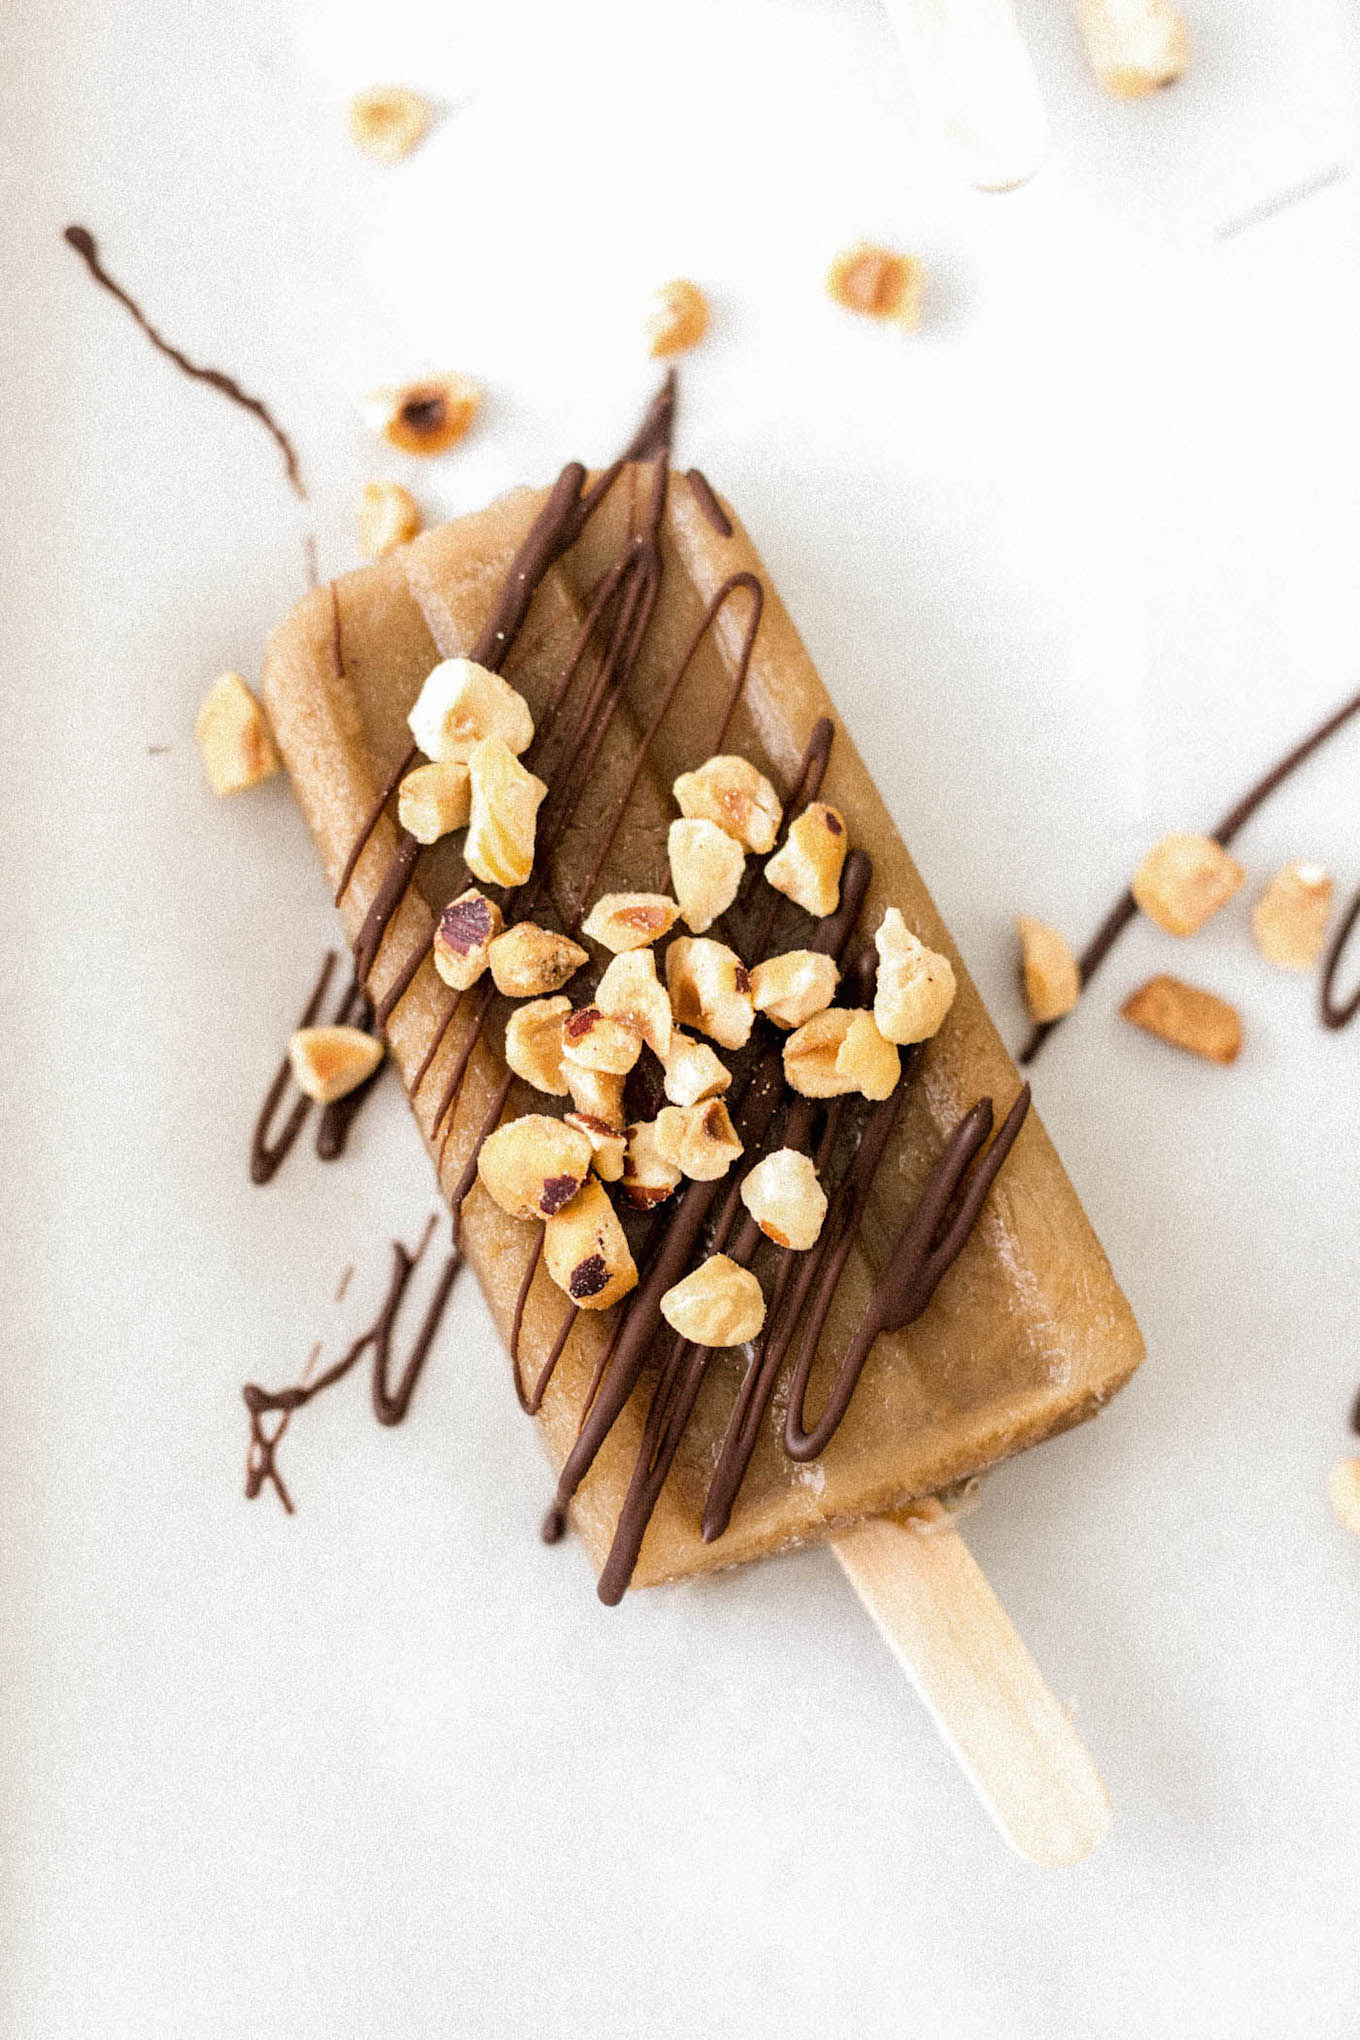 Coffee Popsicles with Chocolate Drizzle | The Coastal Confidence by Aubrey Yandow